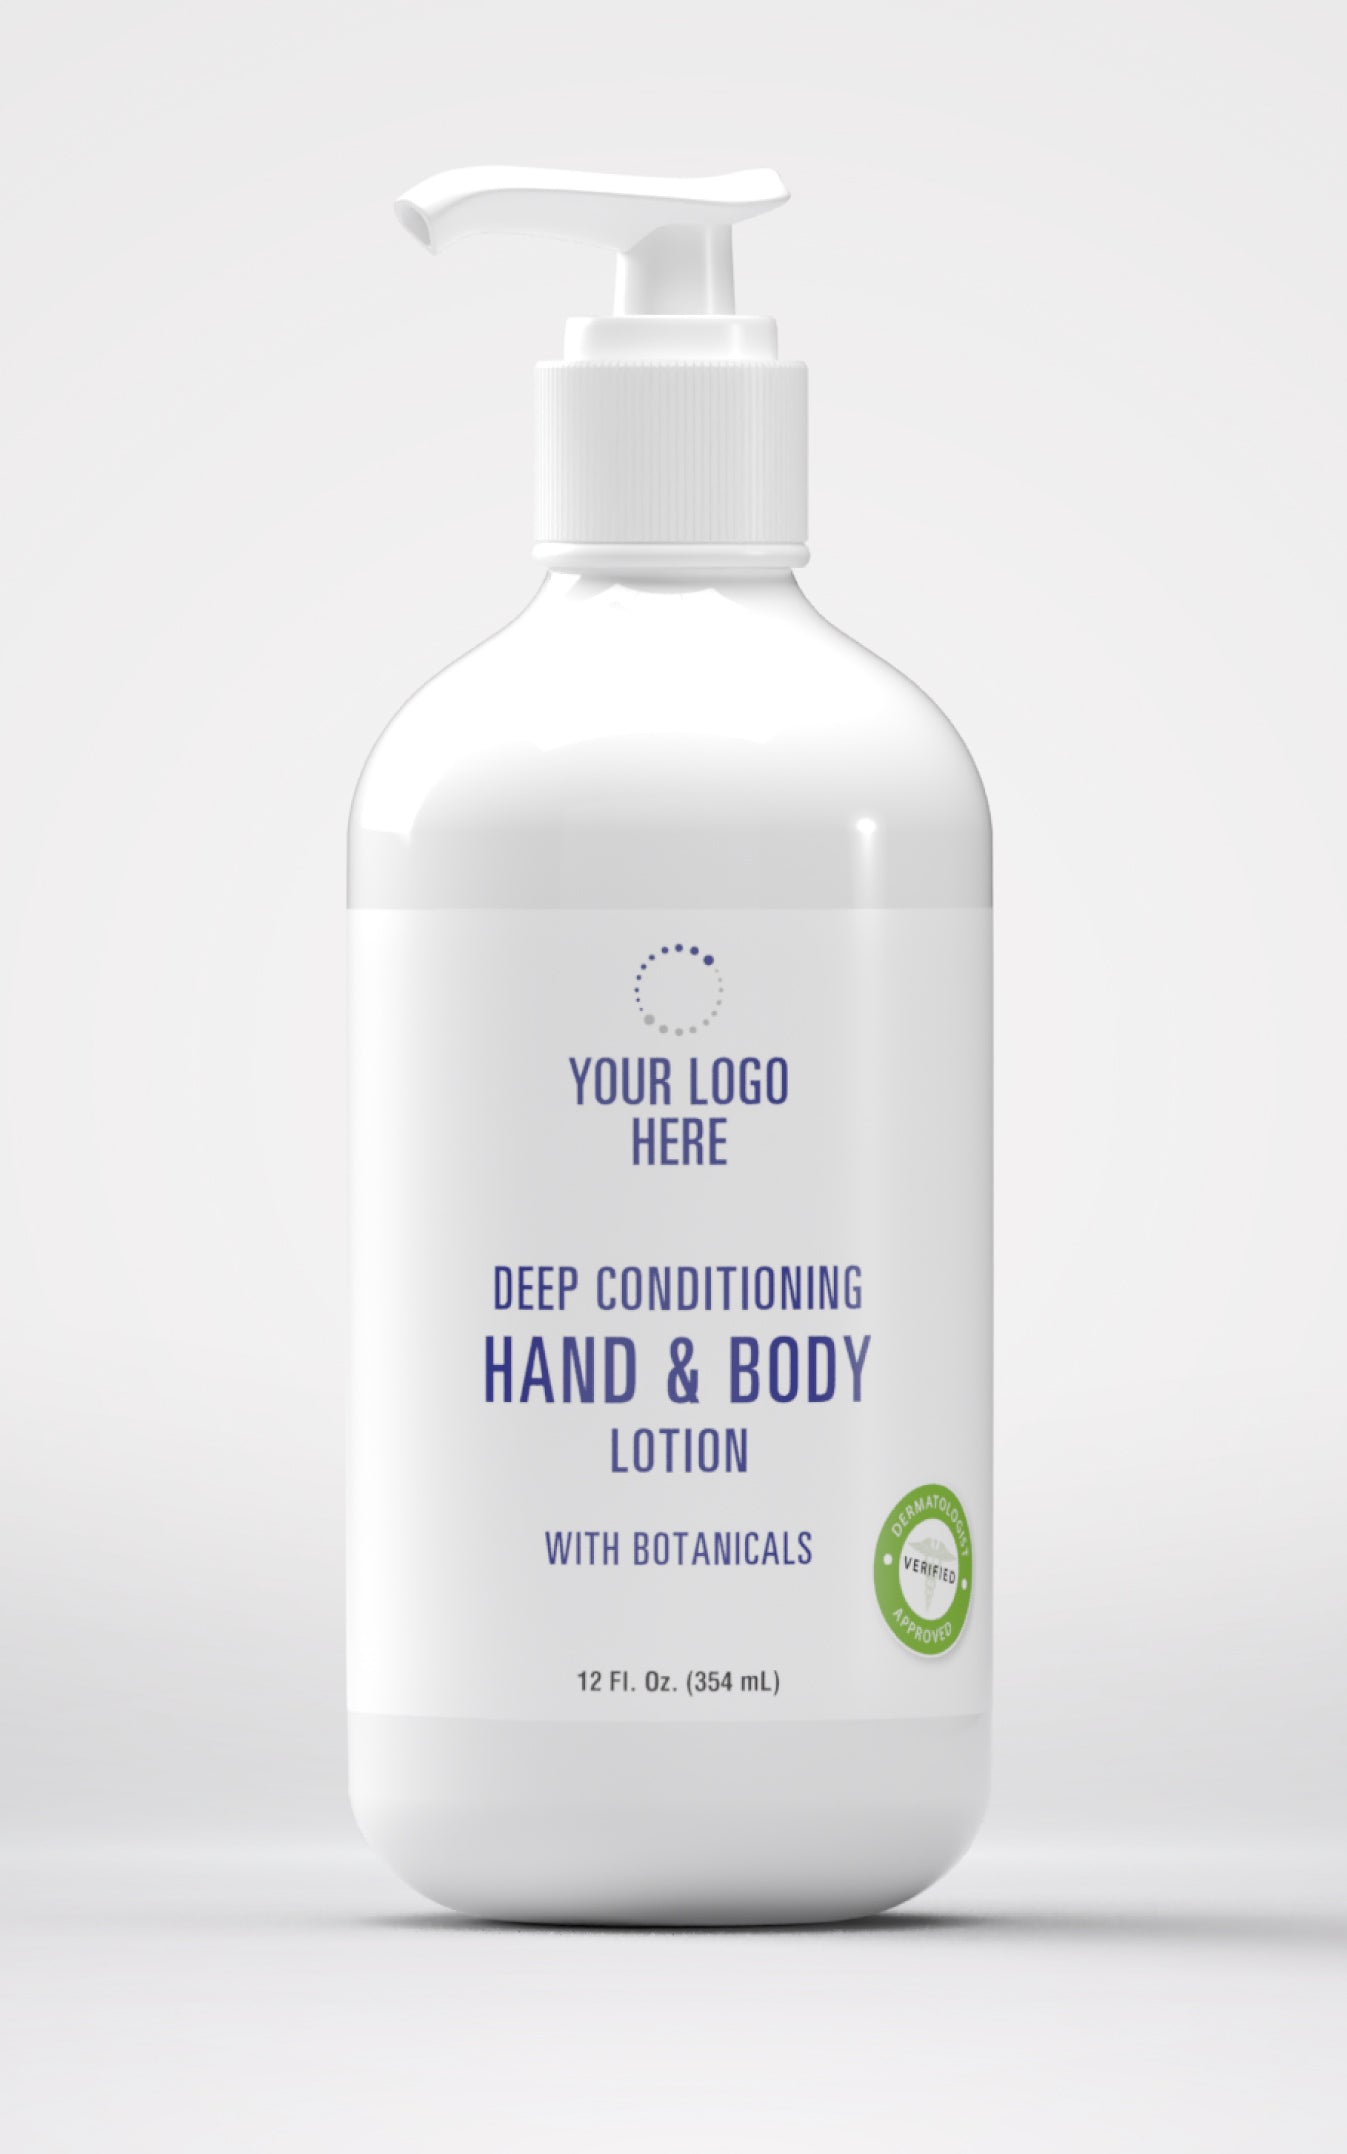 Deep Conditioning Hand & Body Lotion with Botanicals